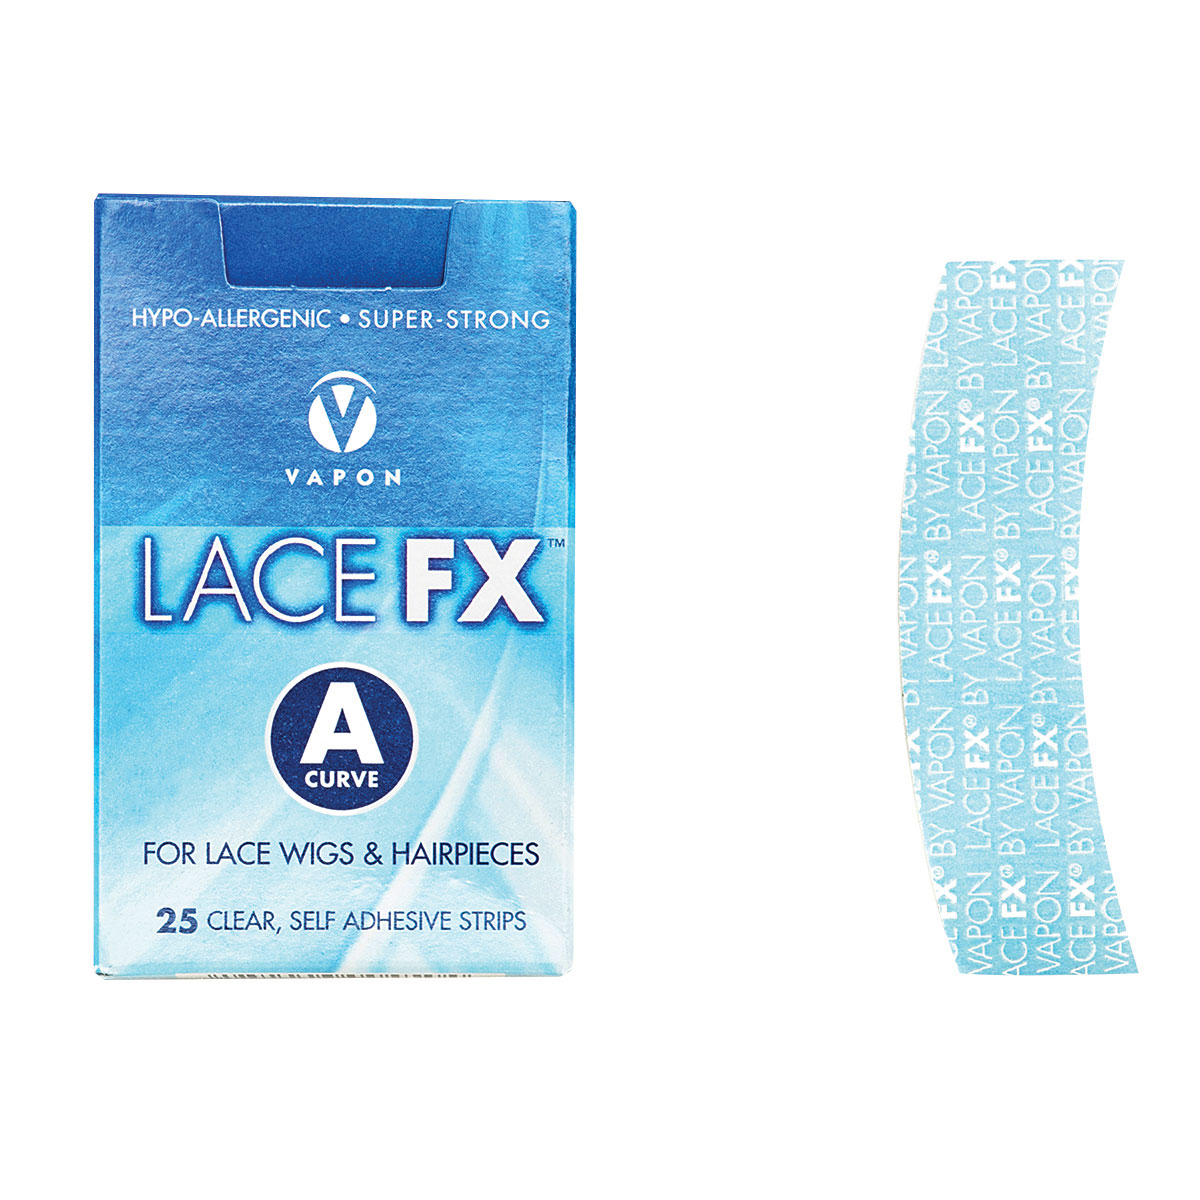 VAPON - LaceFX Tape - Slightly Curved